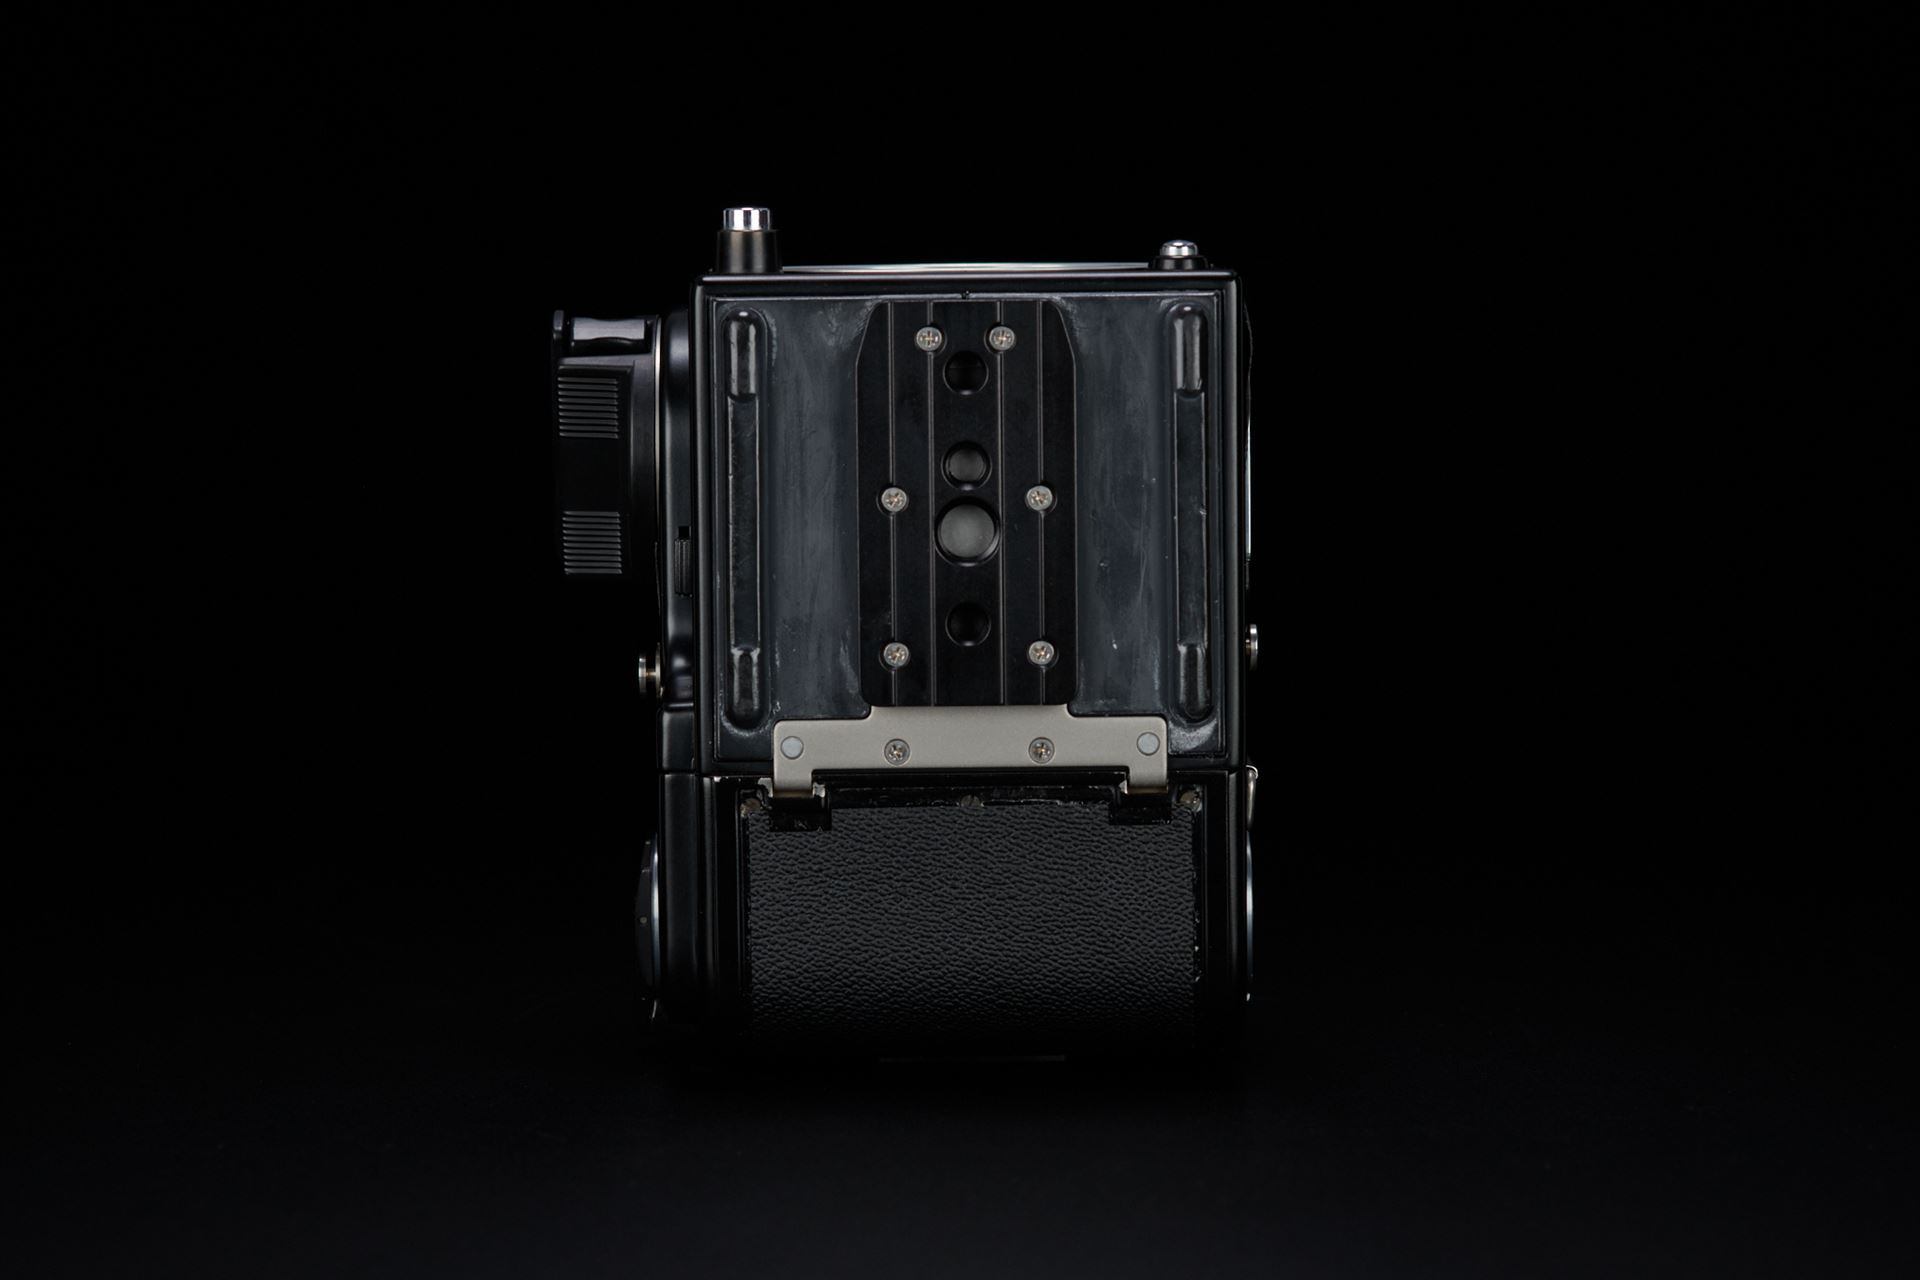 Picture of hasselblad 503 cxi w/ planar 80mm f/2.8